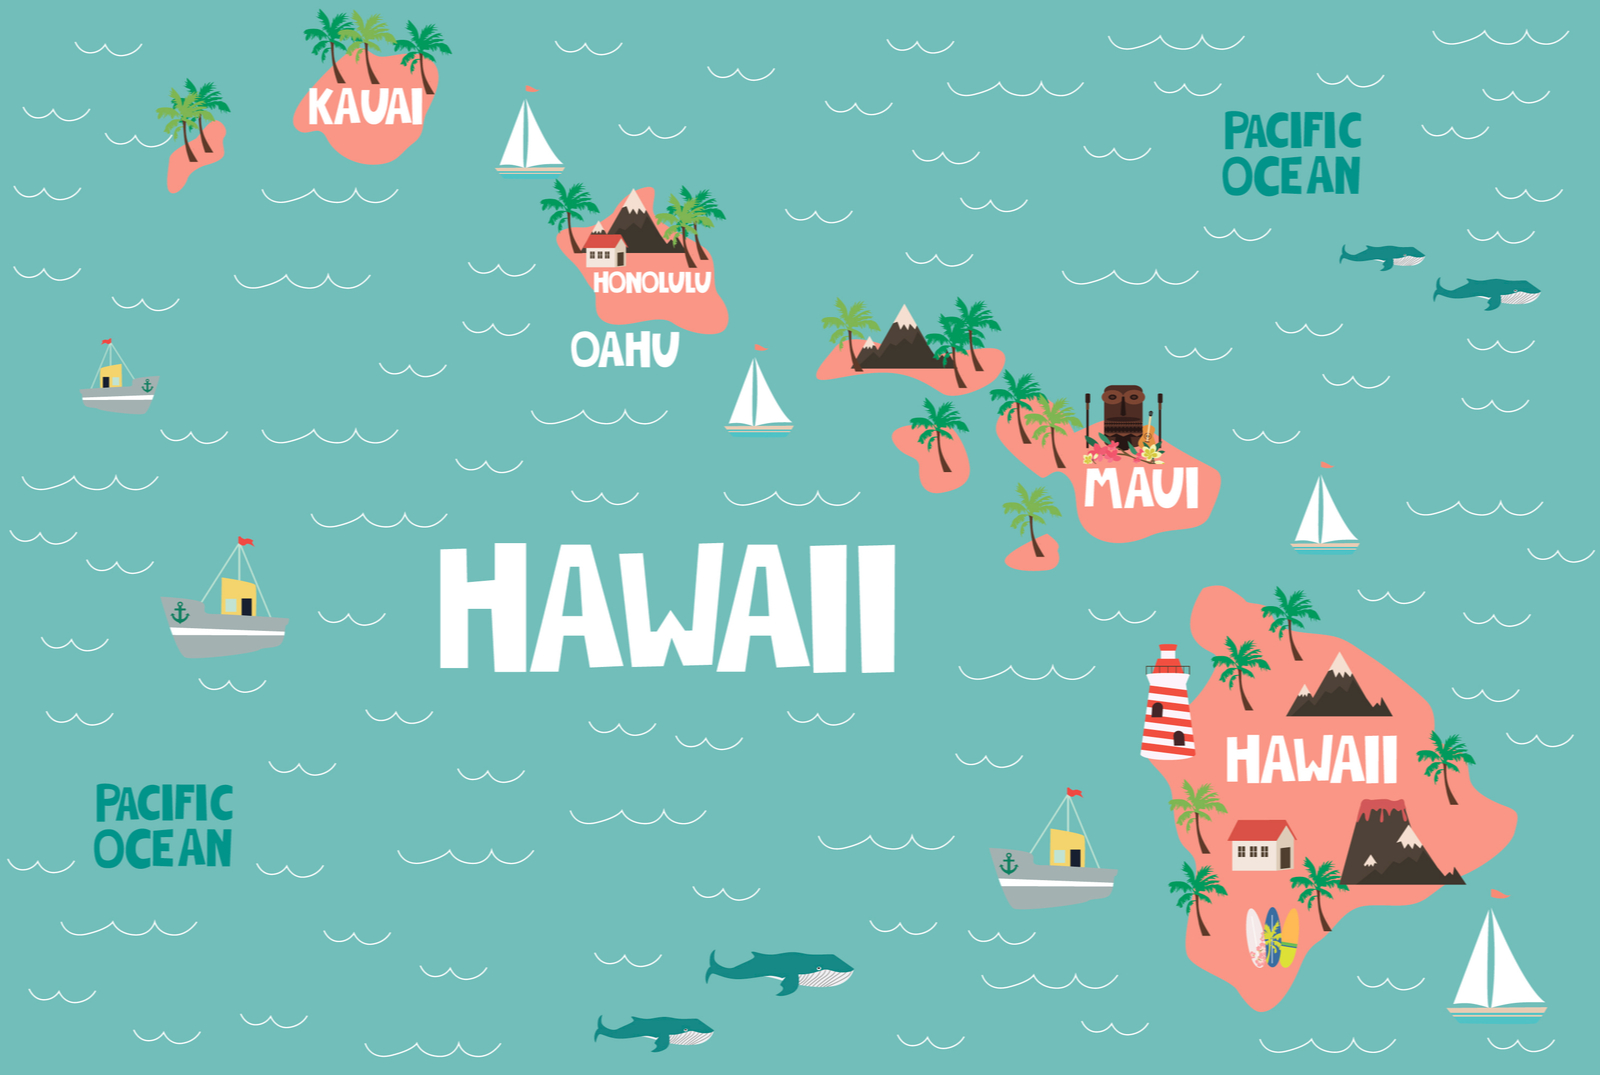 Illustrated map showing you where to stay in Hawaii for different activities